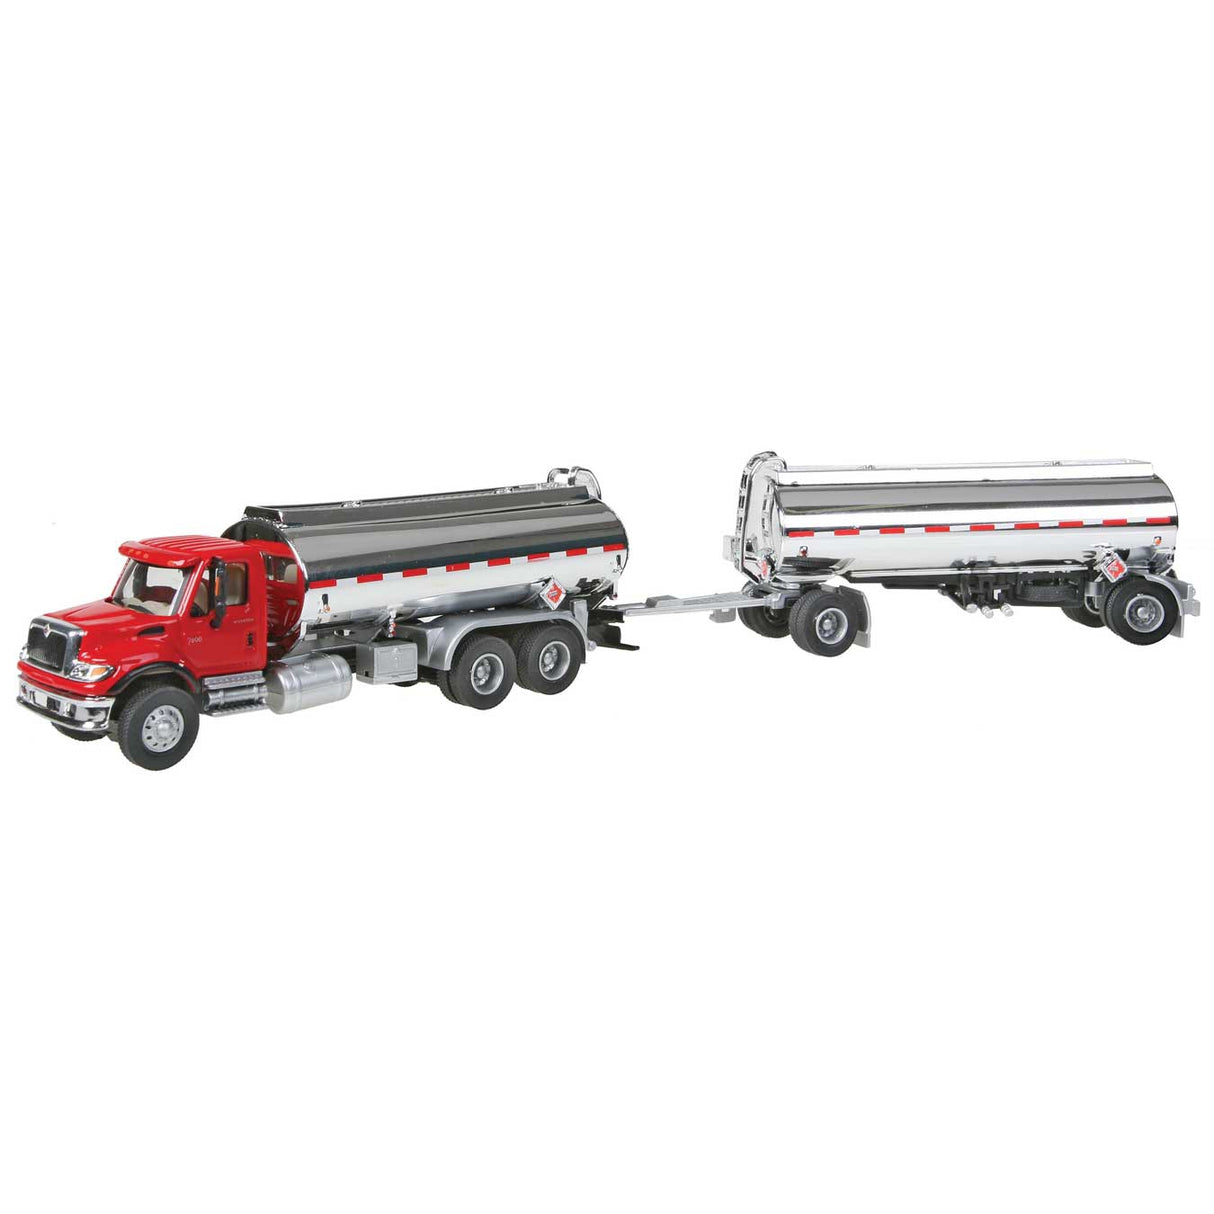 Walthers International(R) 7600 Tank Truck w/Trailer - Assembled -- Al's Victory Service, Interstate Oil & Winner's Circle decals (red, chrome)